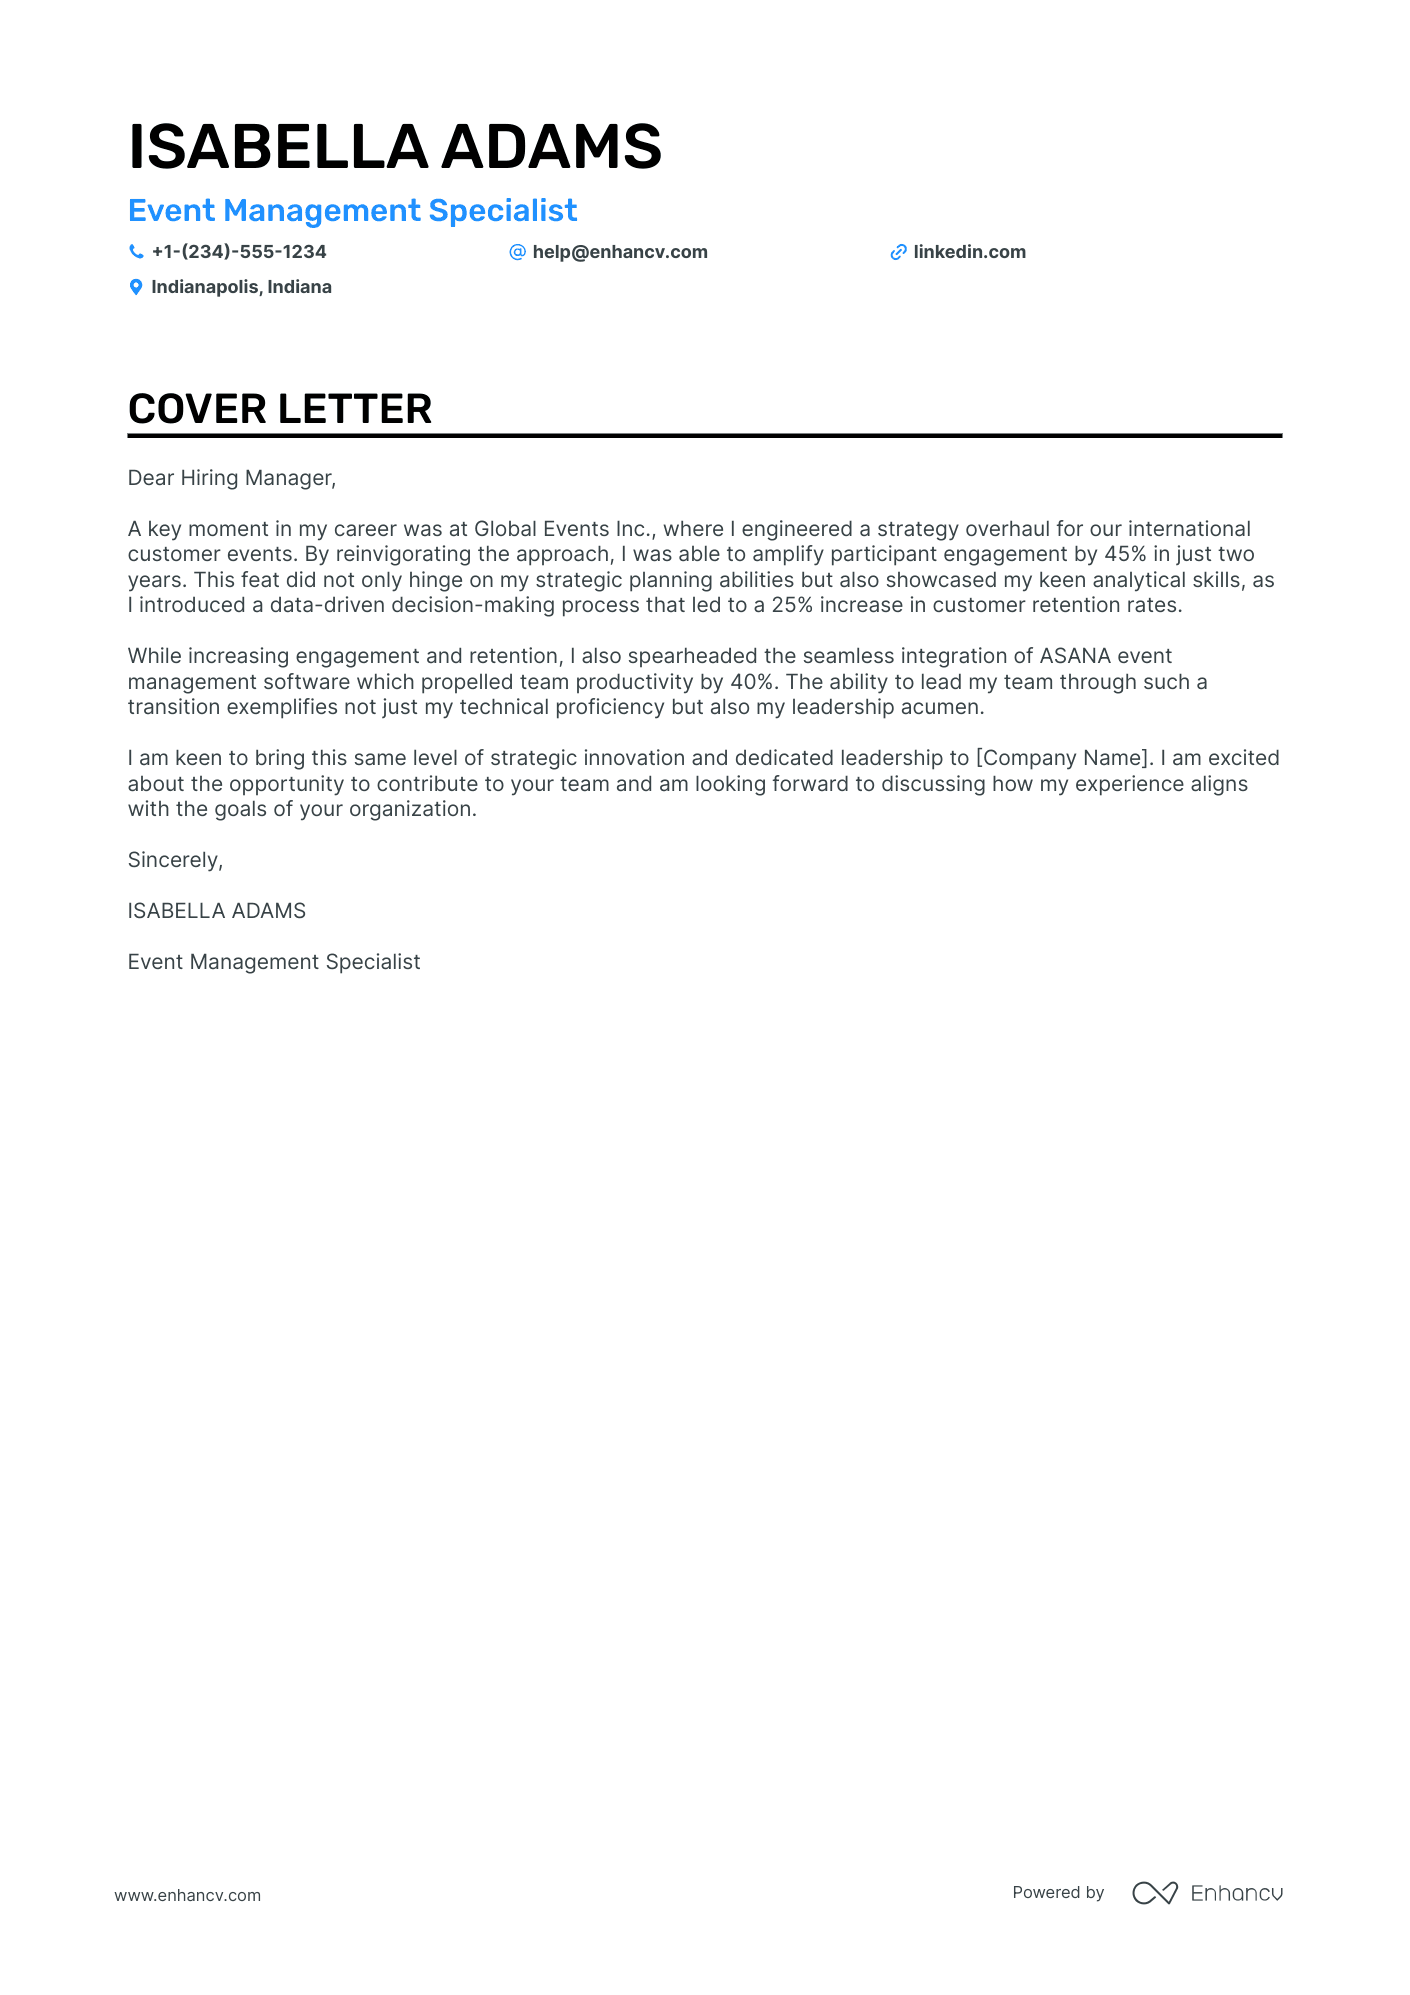 Event Marketing cover letter